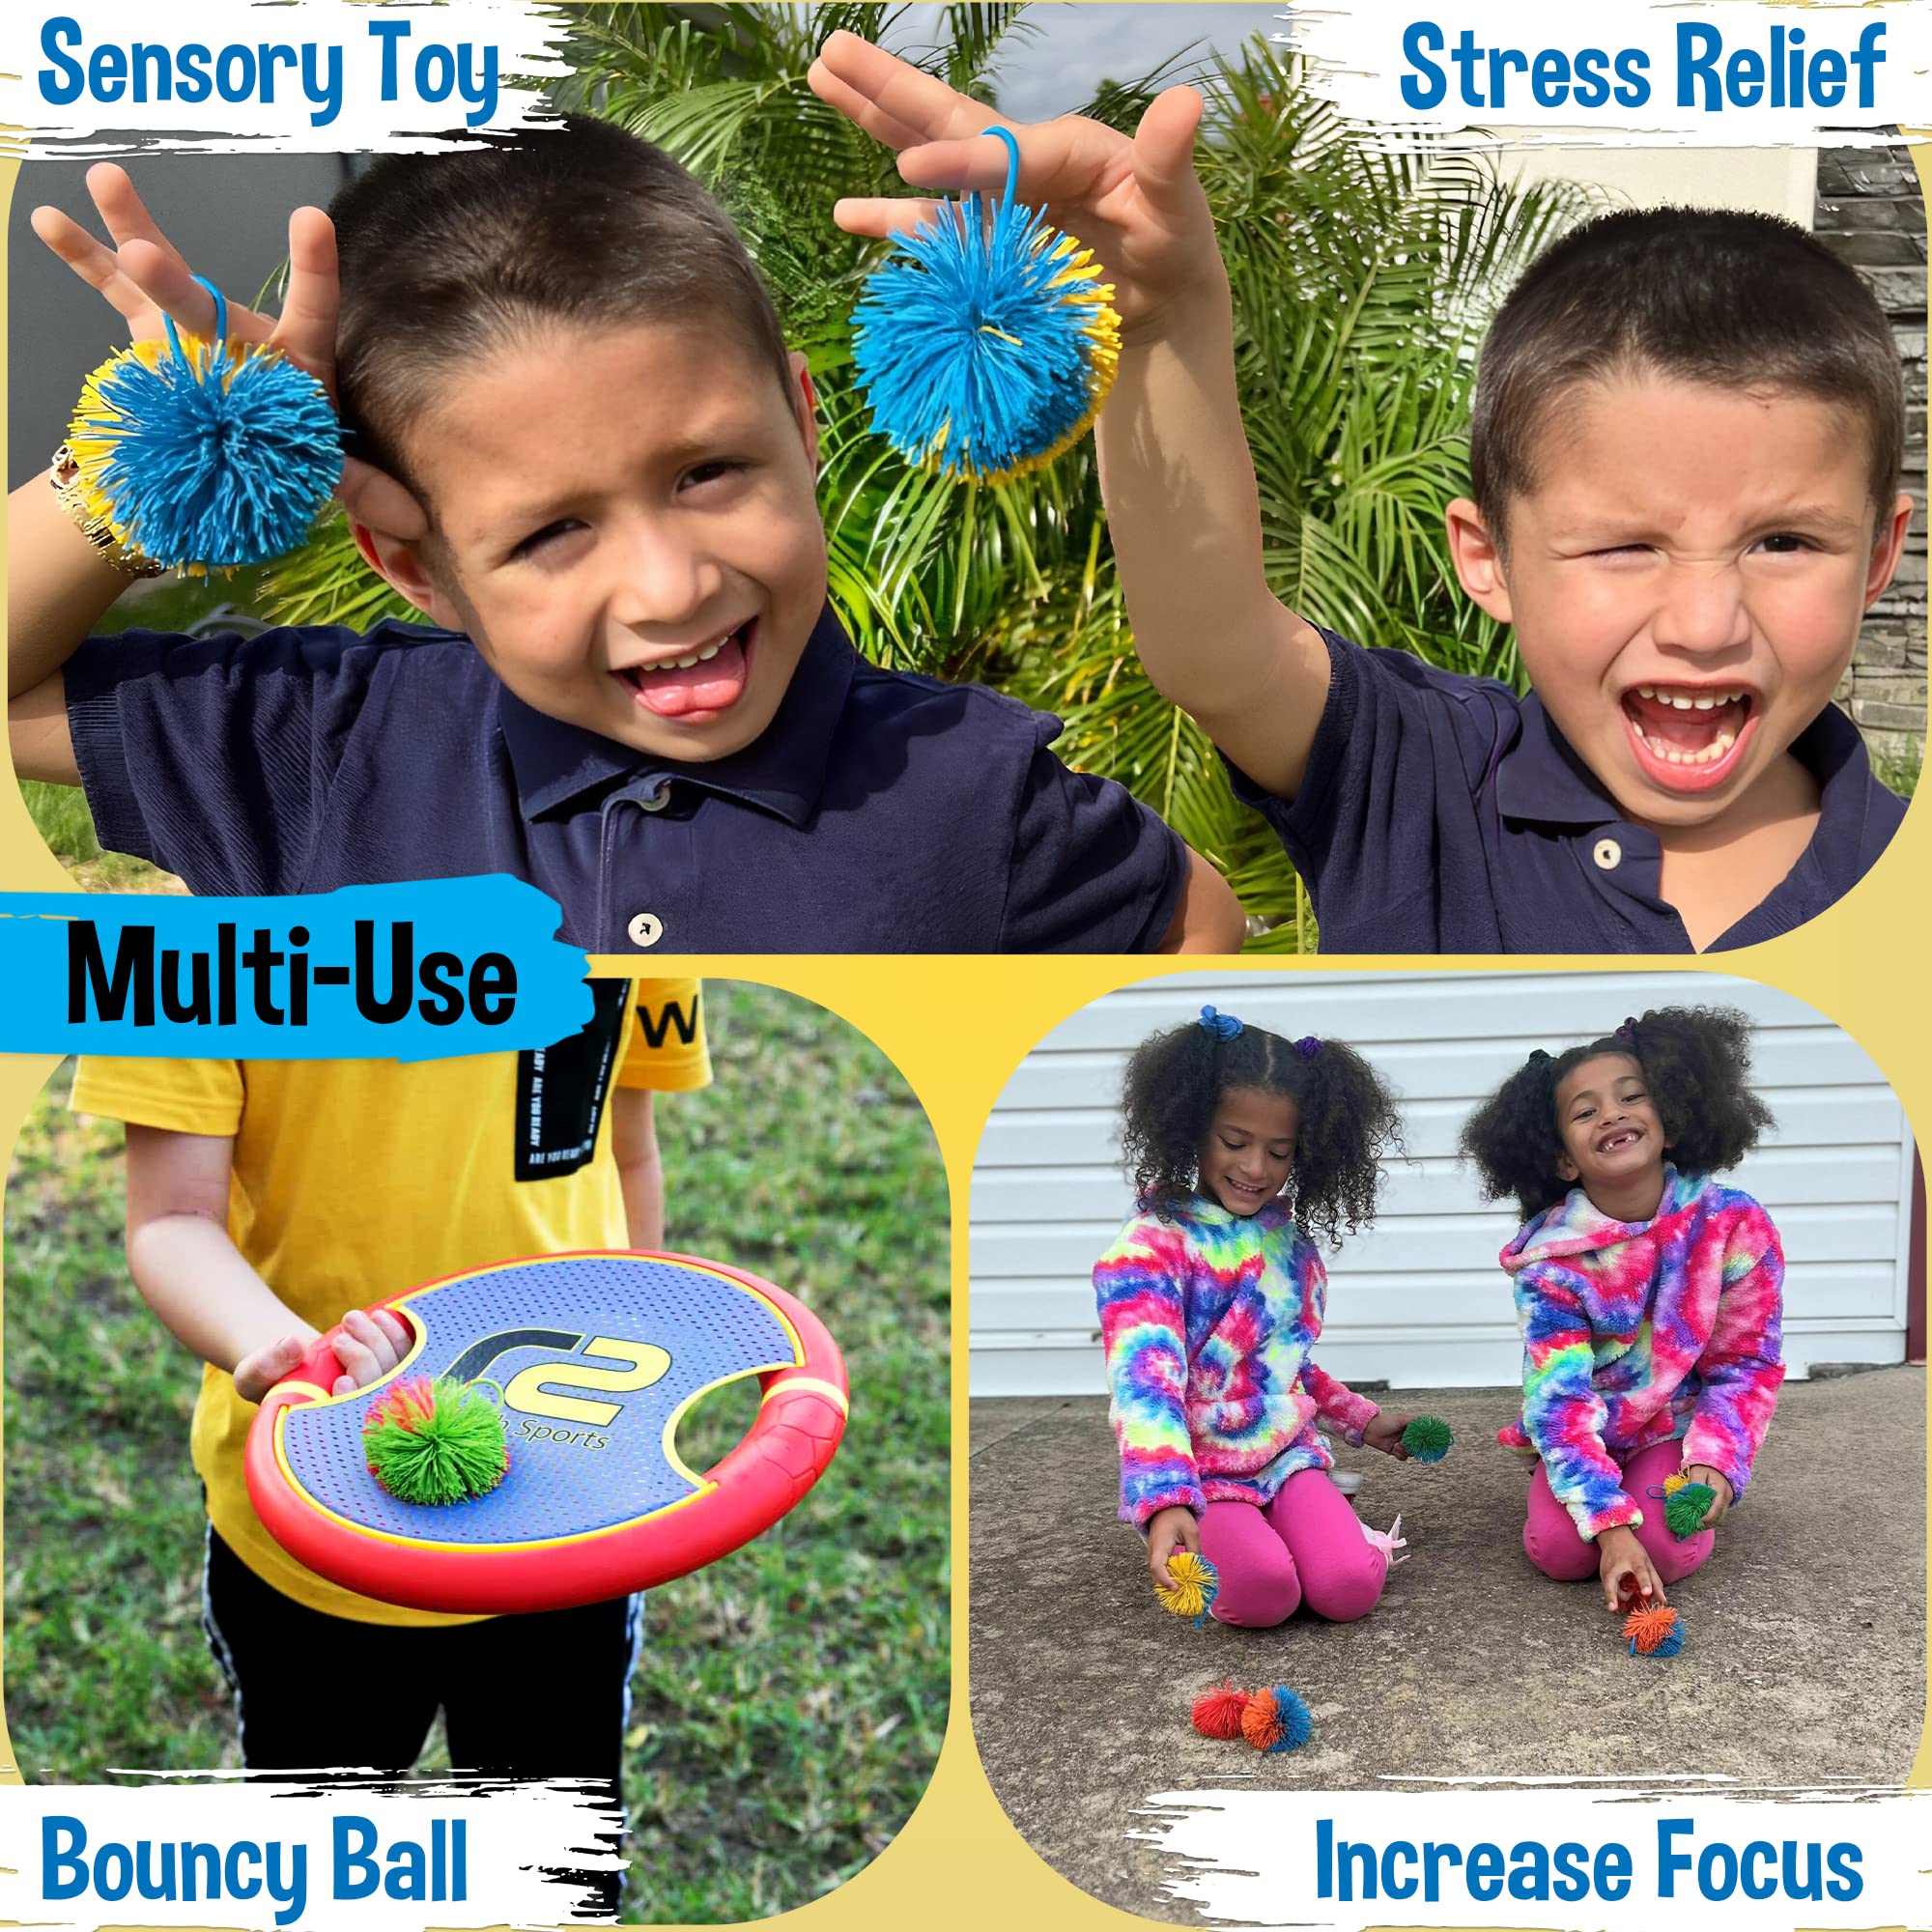 Kooosh Balls for Kids 8 Pack - Easter Gift Ball Stress Relief Monkey Balls Fidget Toy for Kids - Toss & Catch Monkey Stringy Balls & Sensory Toys for All Ages of Boys & Girls 4 5 6 7 8 9 10 Year Olds